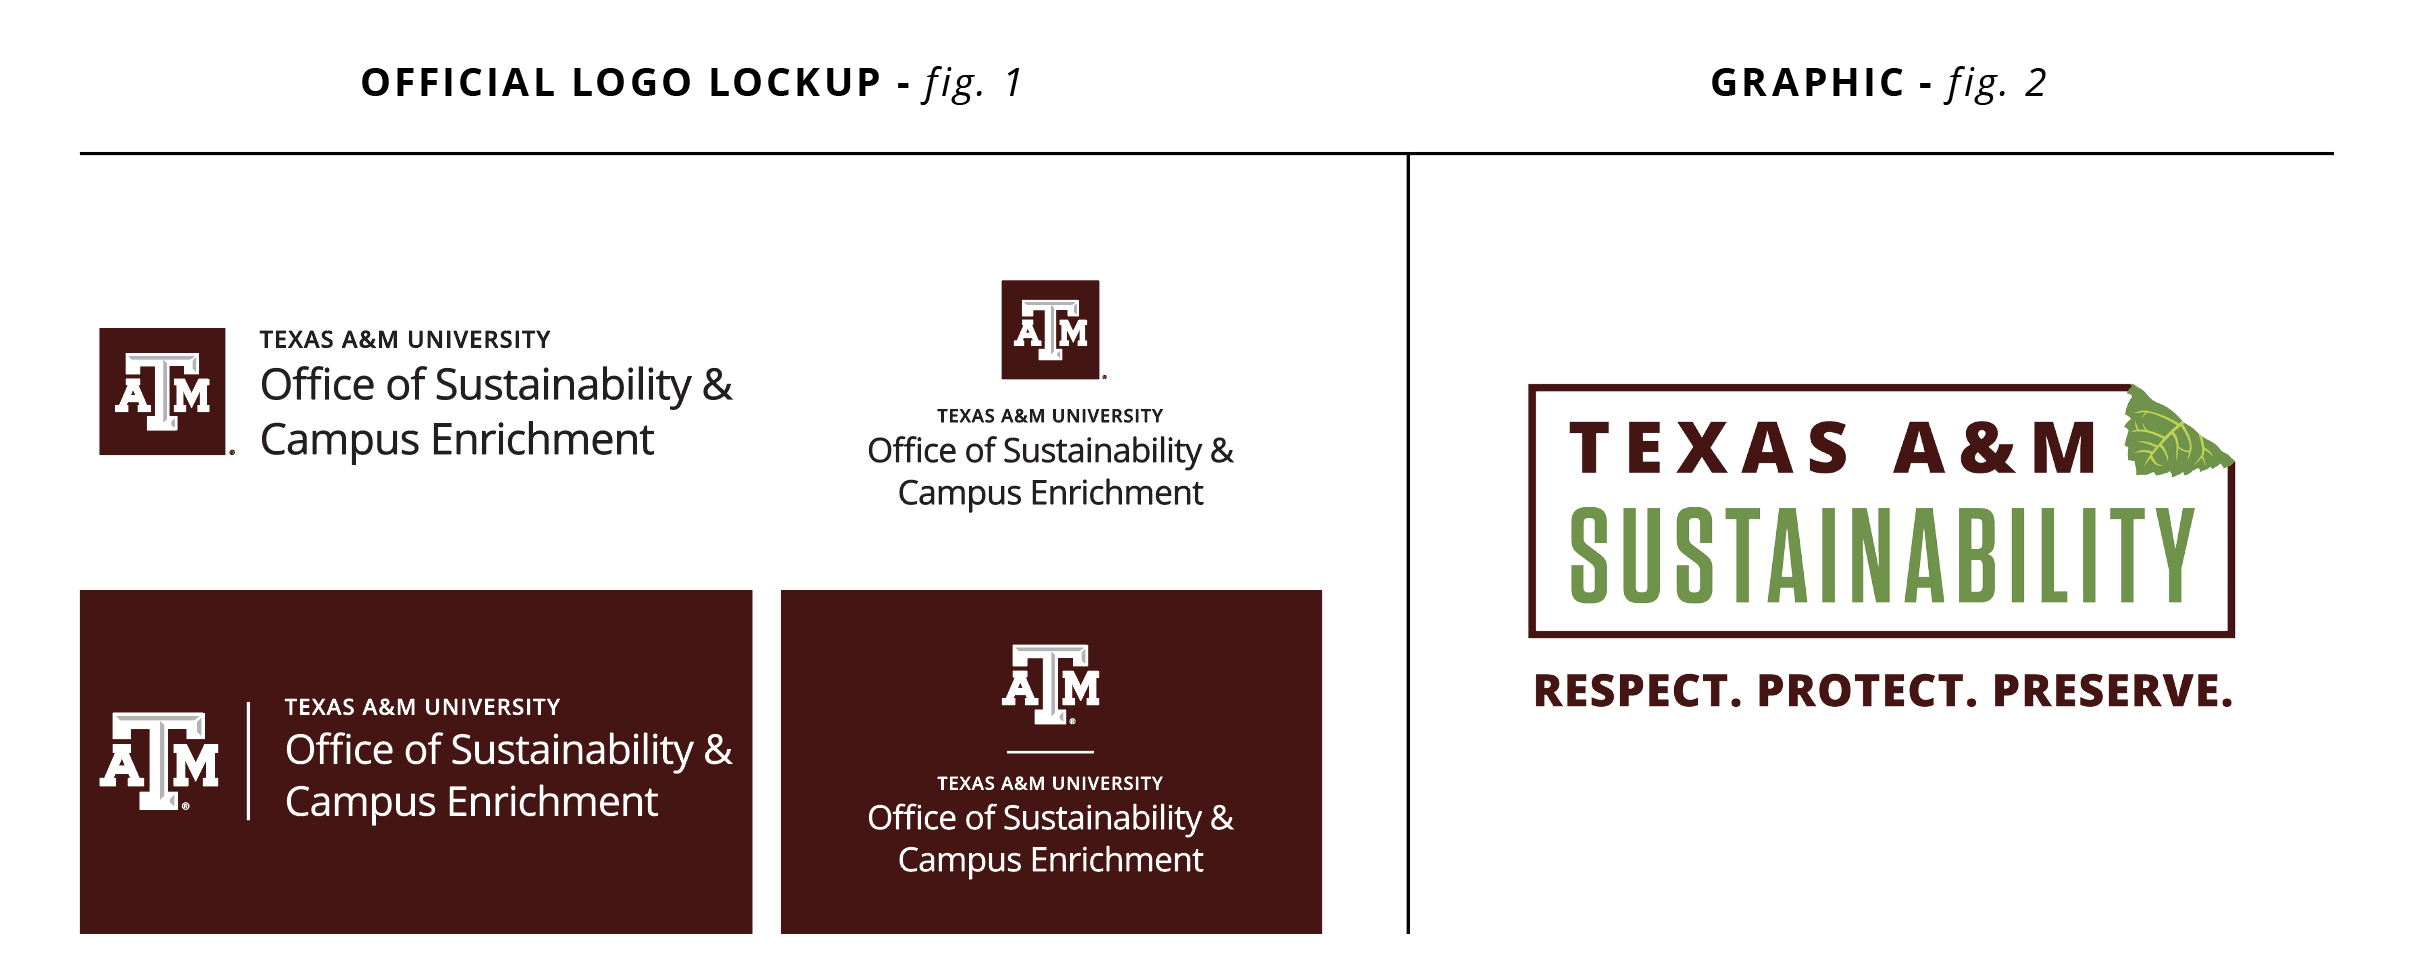 Figure 1 shows the approved Office of Sustainability logo lockups. Figure 2 shows the Sustainability Graphic.